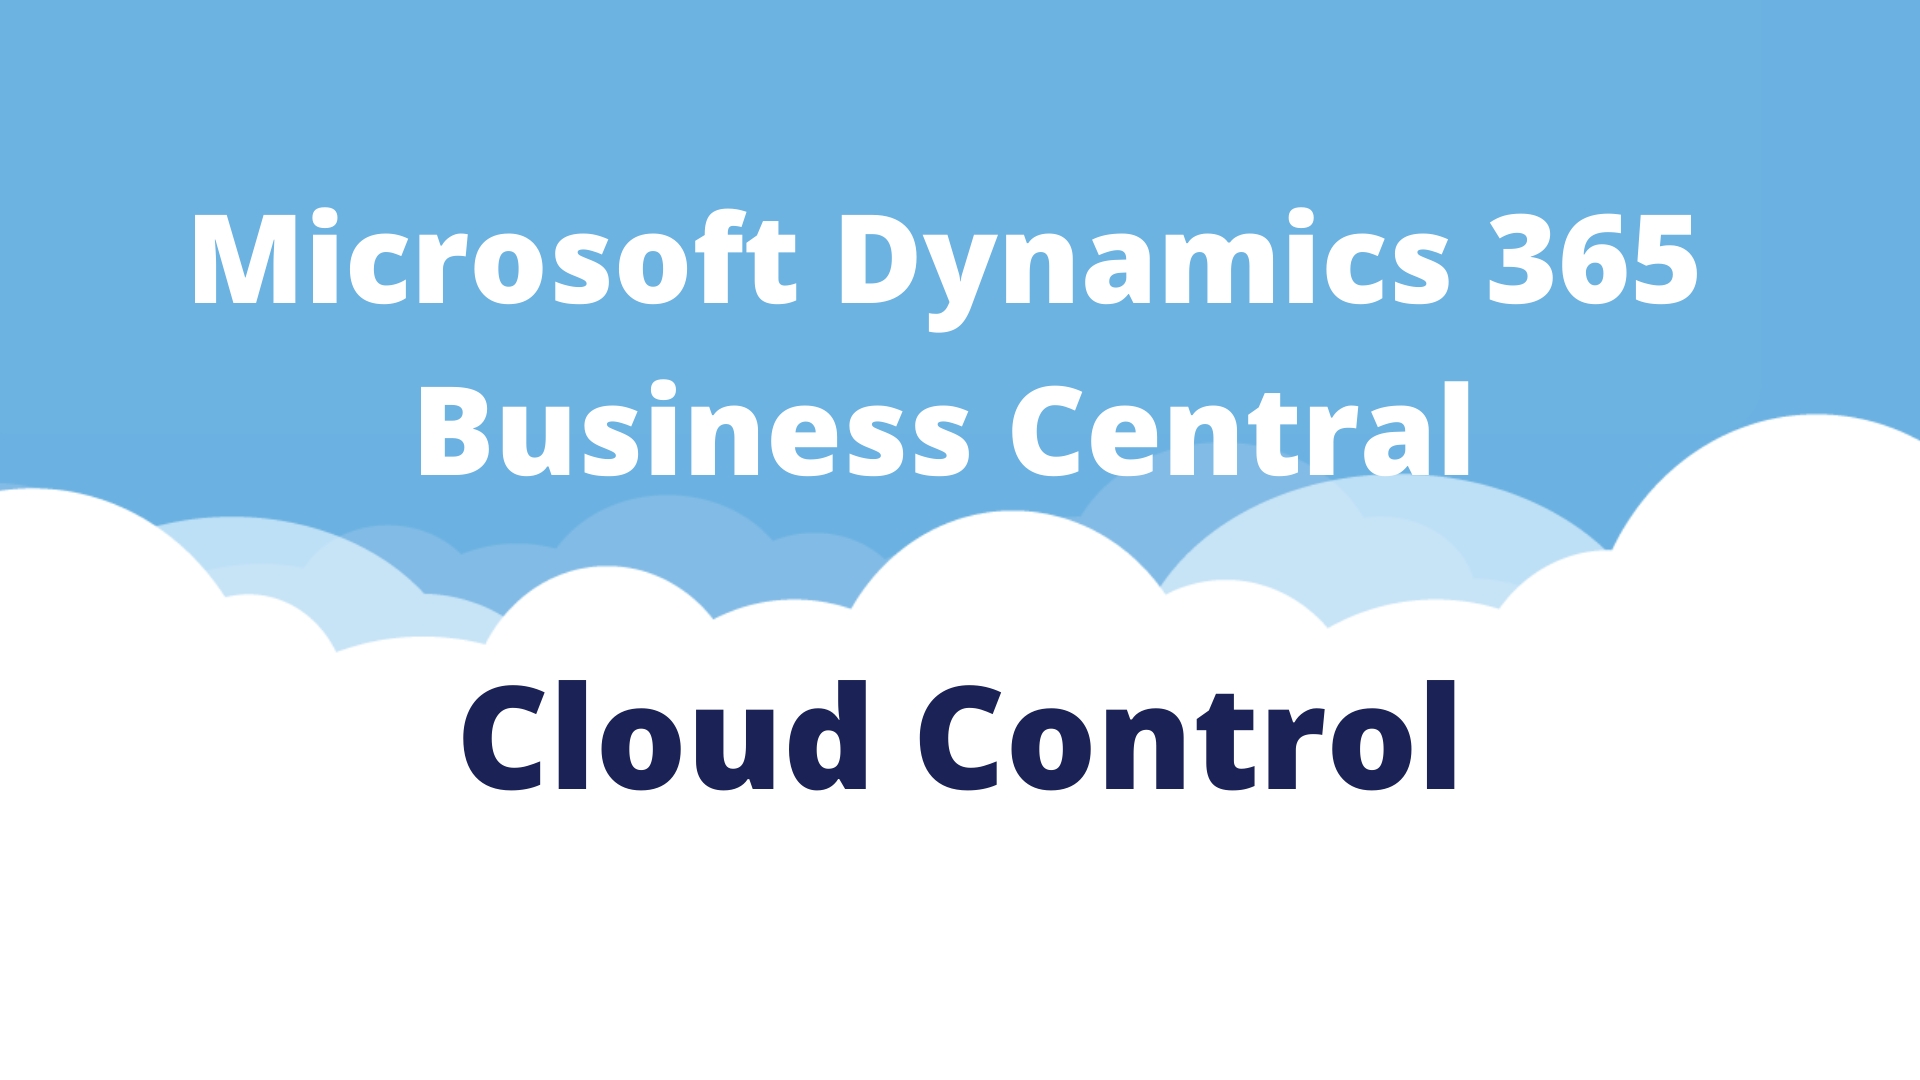 Microsoft Dynamics 365 Business Central is Evolving, but is your Partner?